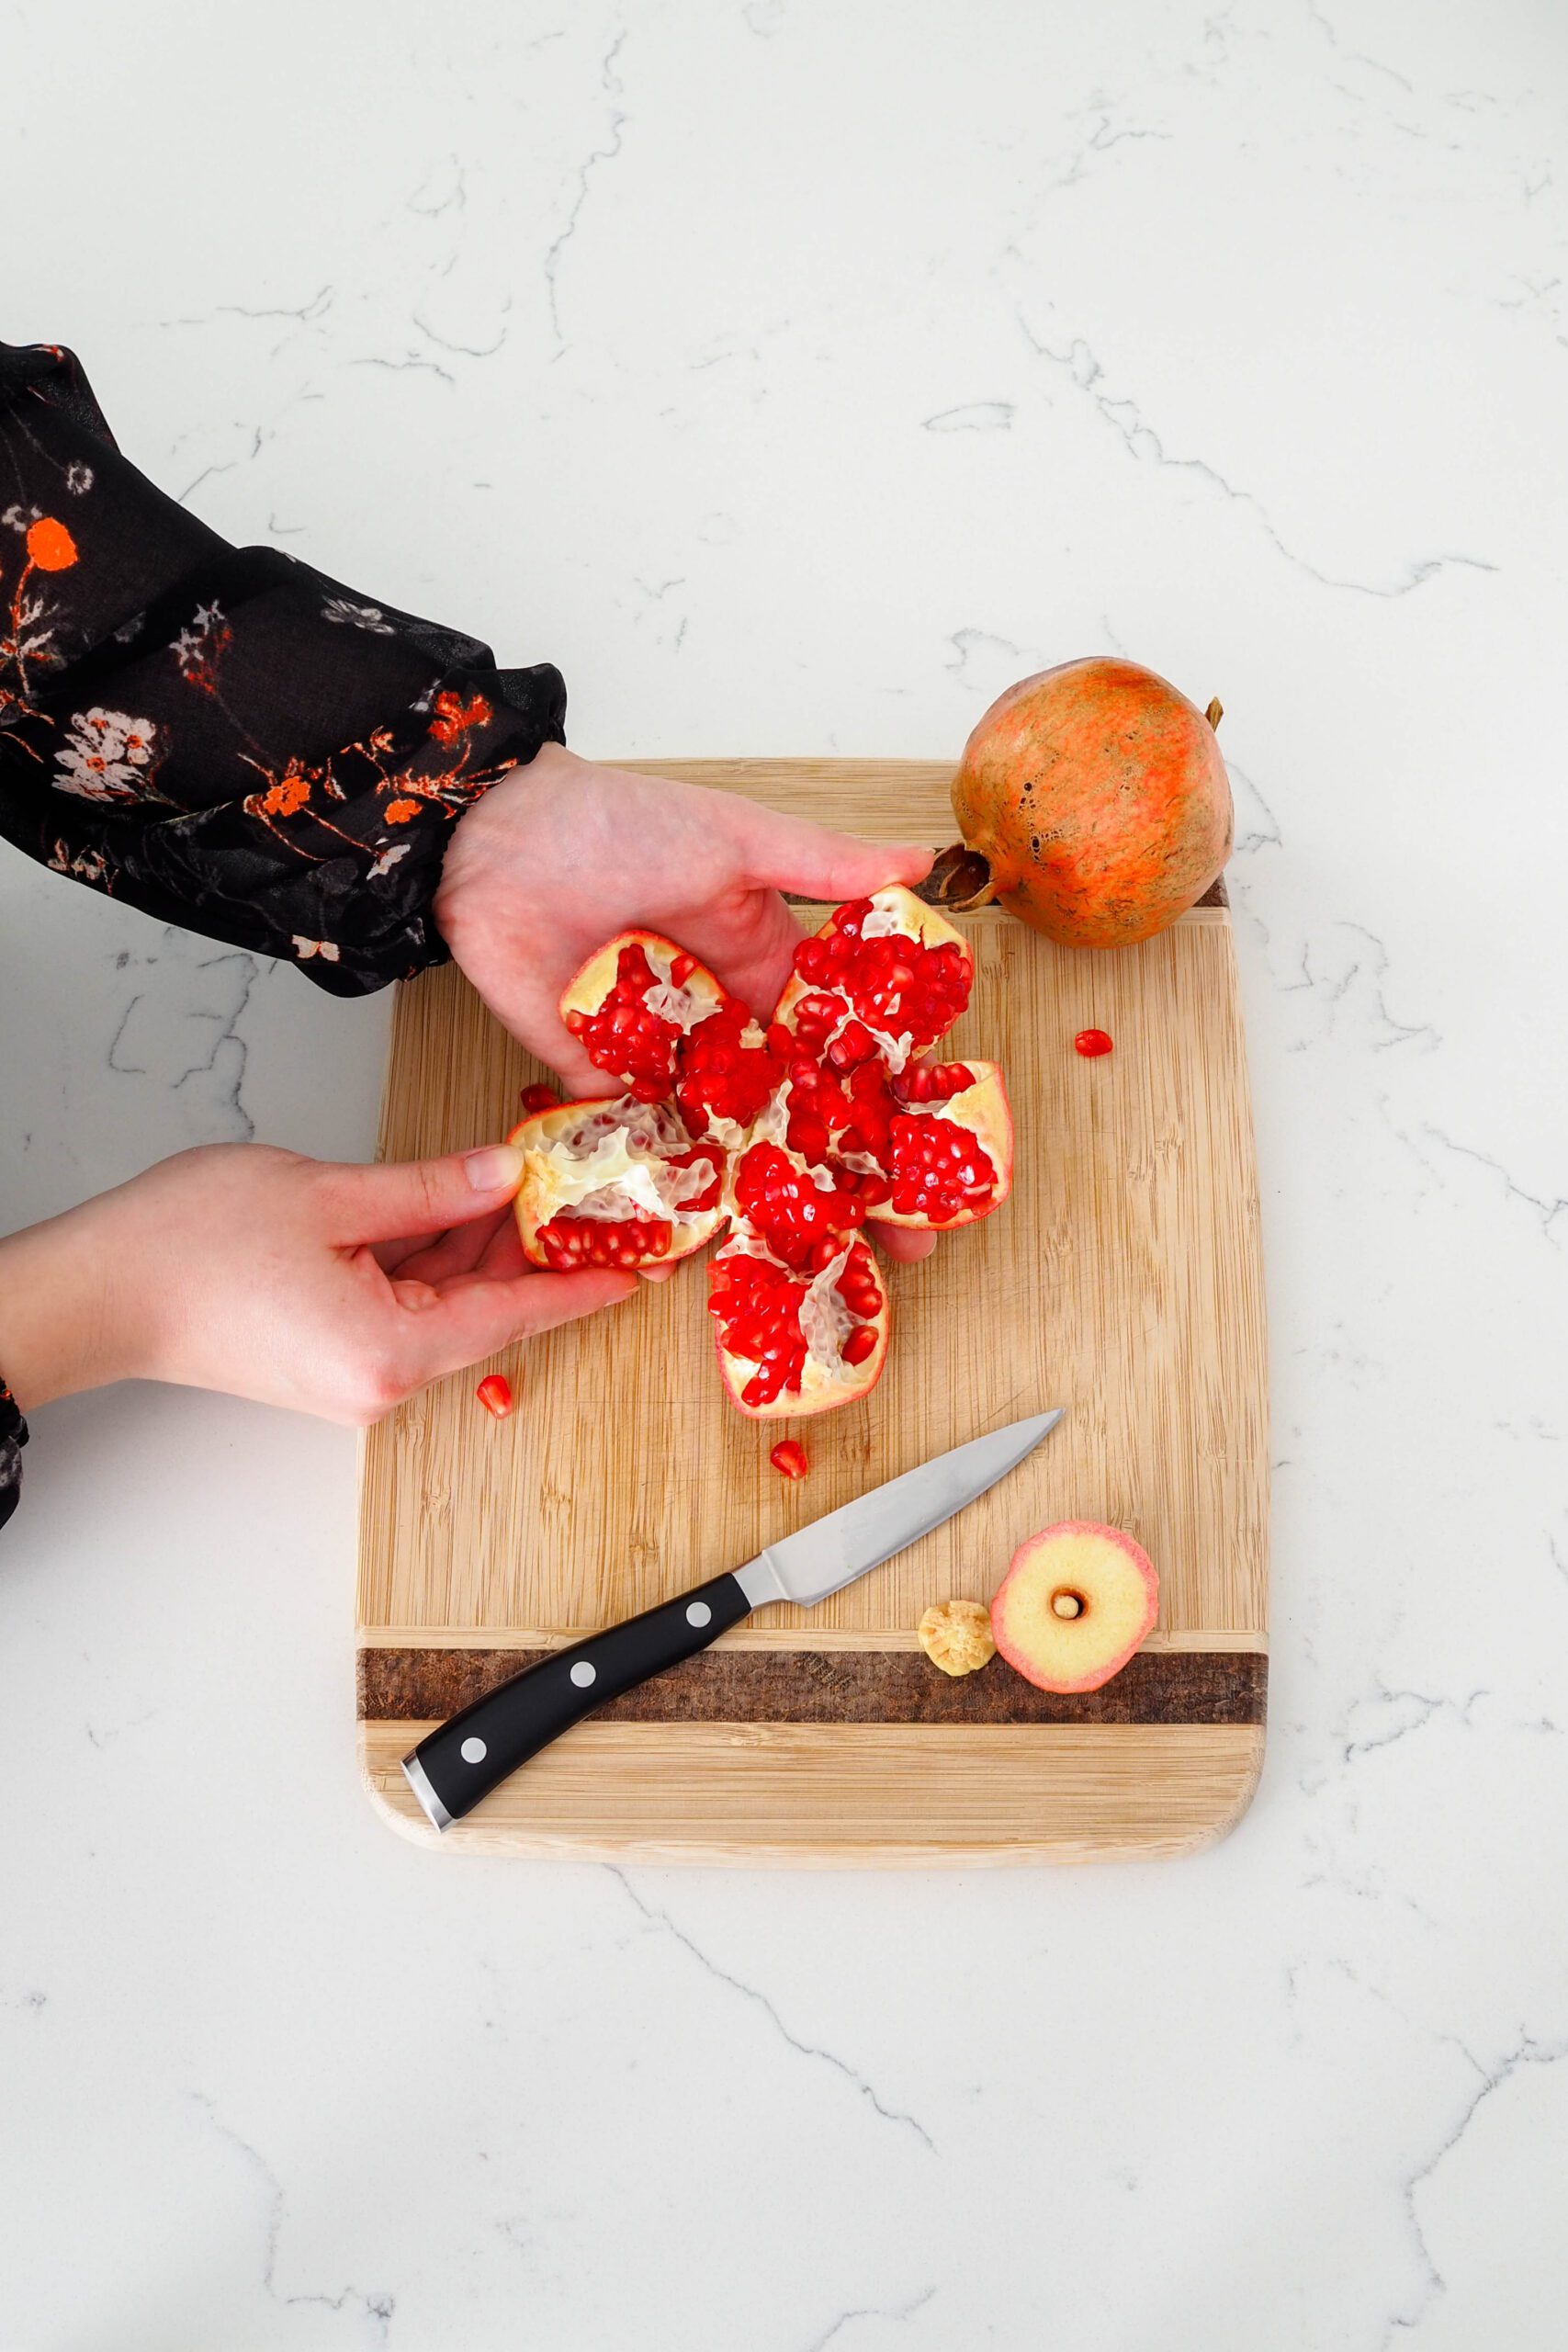 A hand pulls a section of pomegranate away from the fruit.